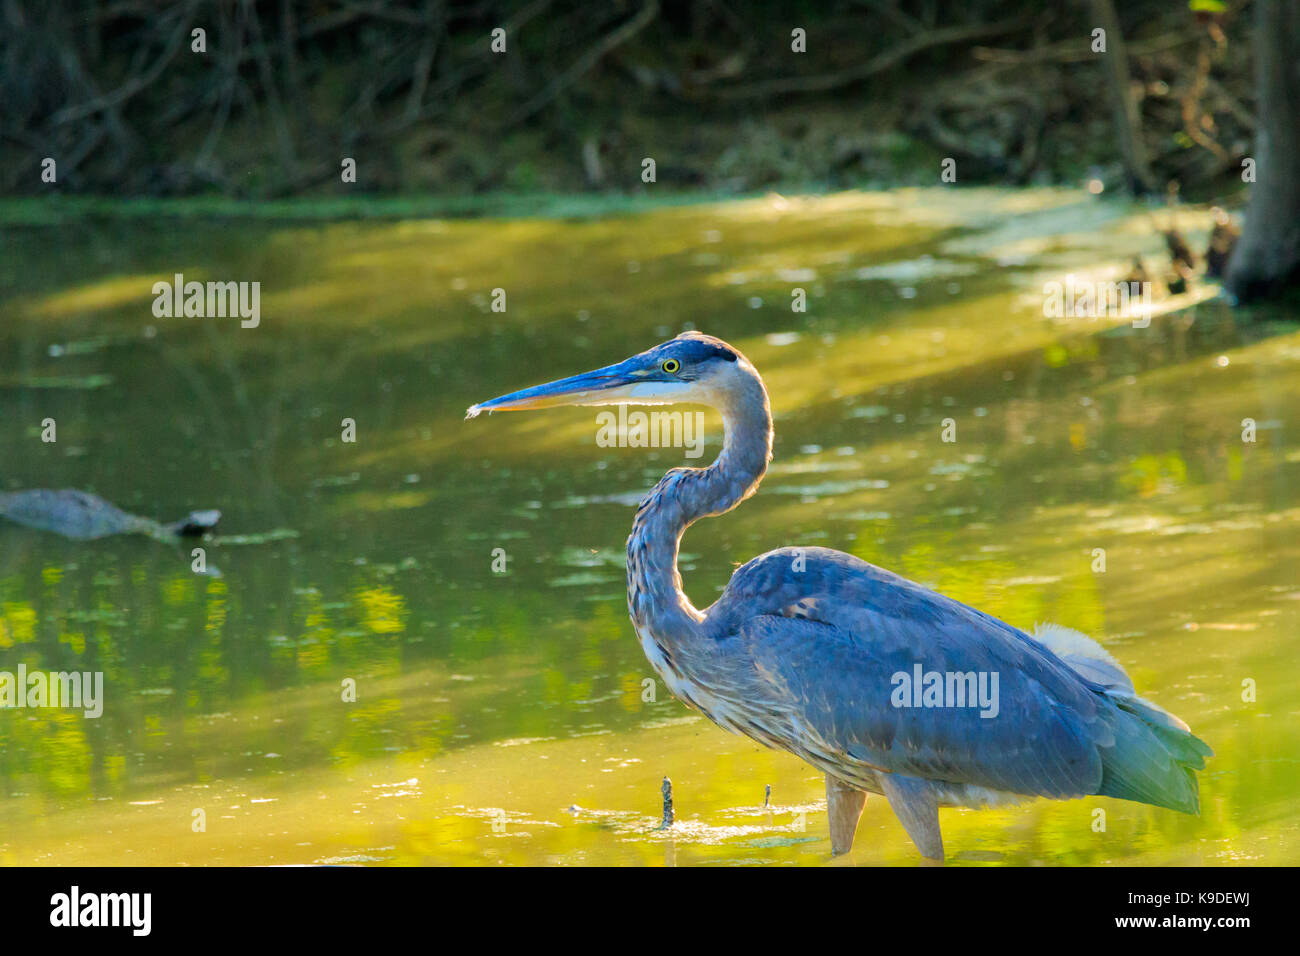 Great Blue Heron Wading in the waters of Bald Knob Wildlife Refuge located in Bald Knob, Arkansas Stock Photo